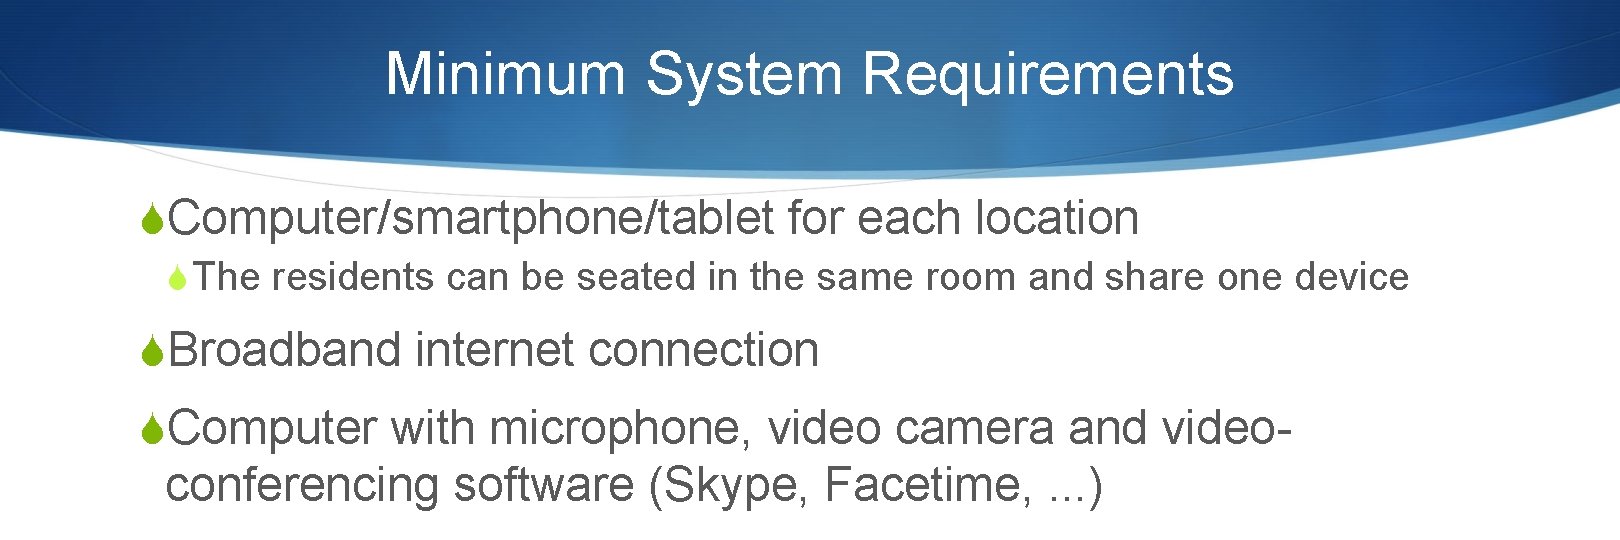 Minimum System Requirements SComputer/smartphone/tablet for each location S The residents can be seated in